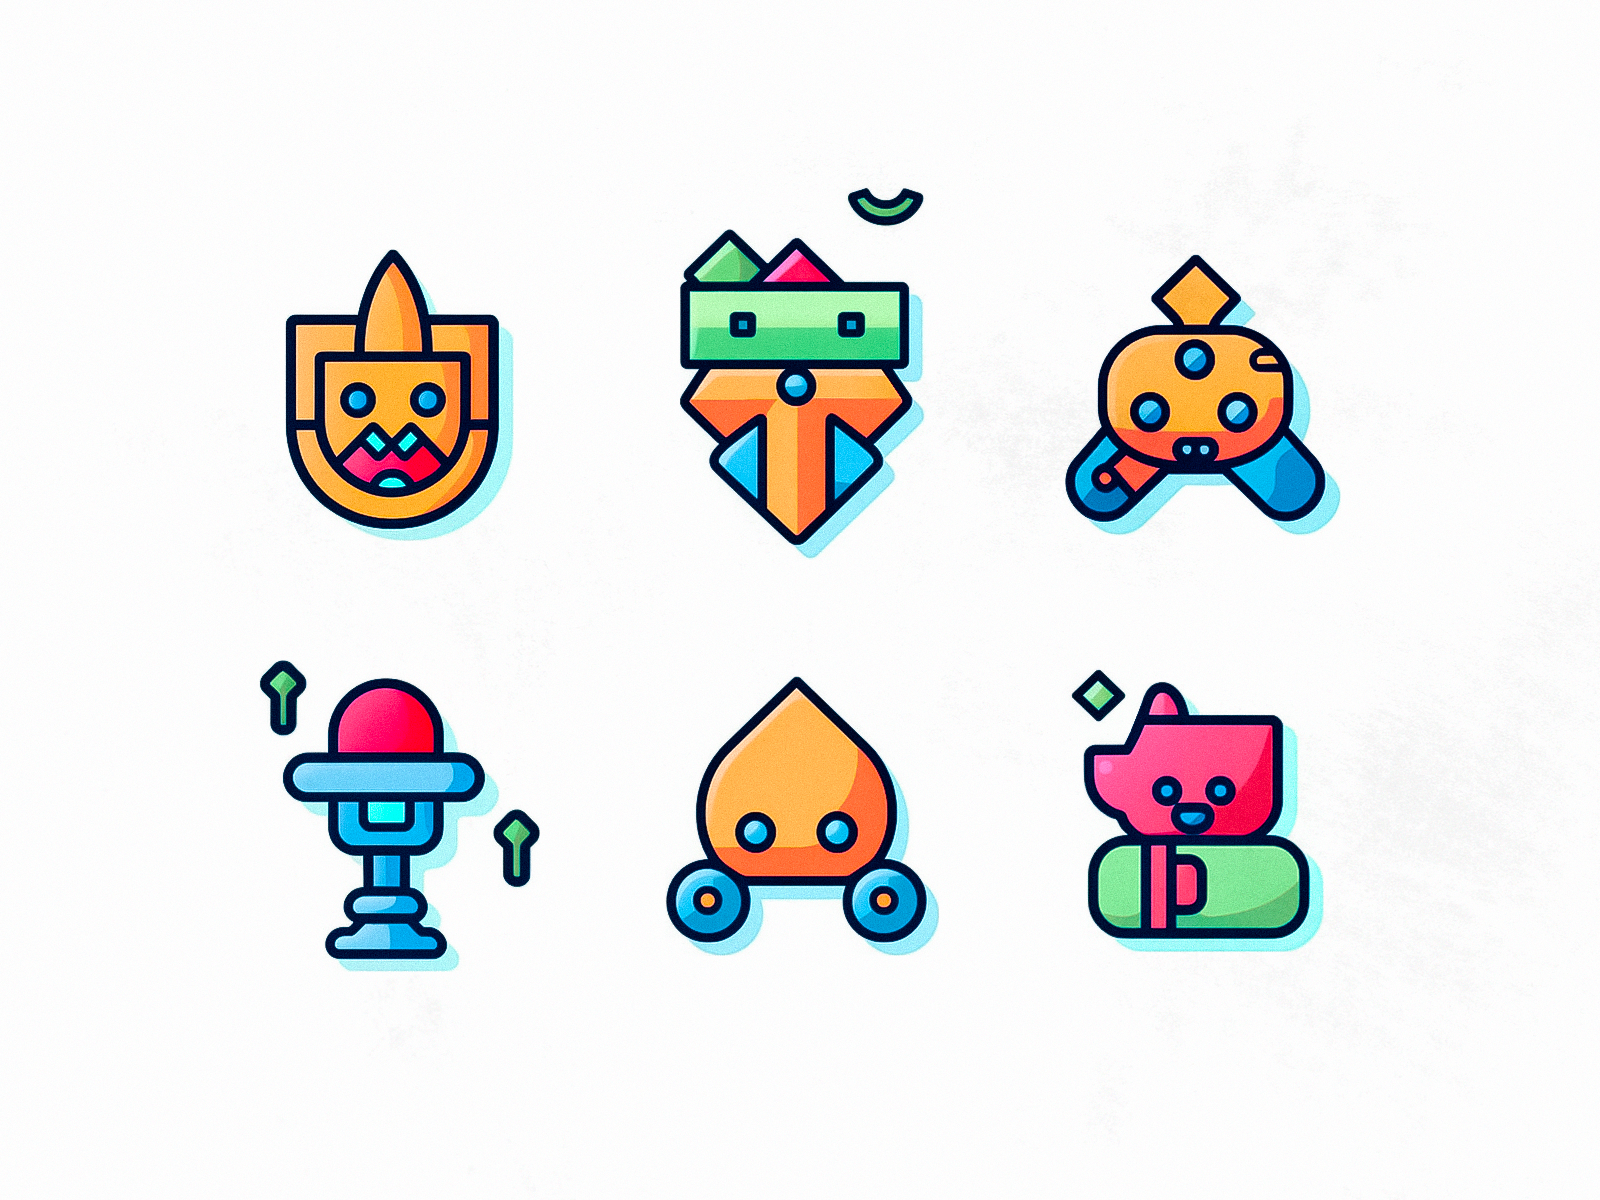 Weird icons set for a game